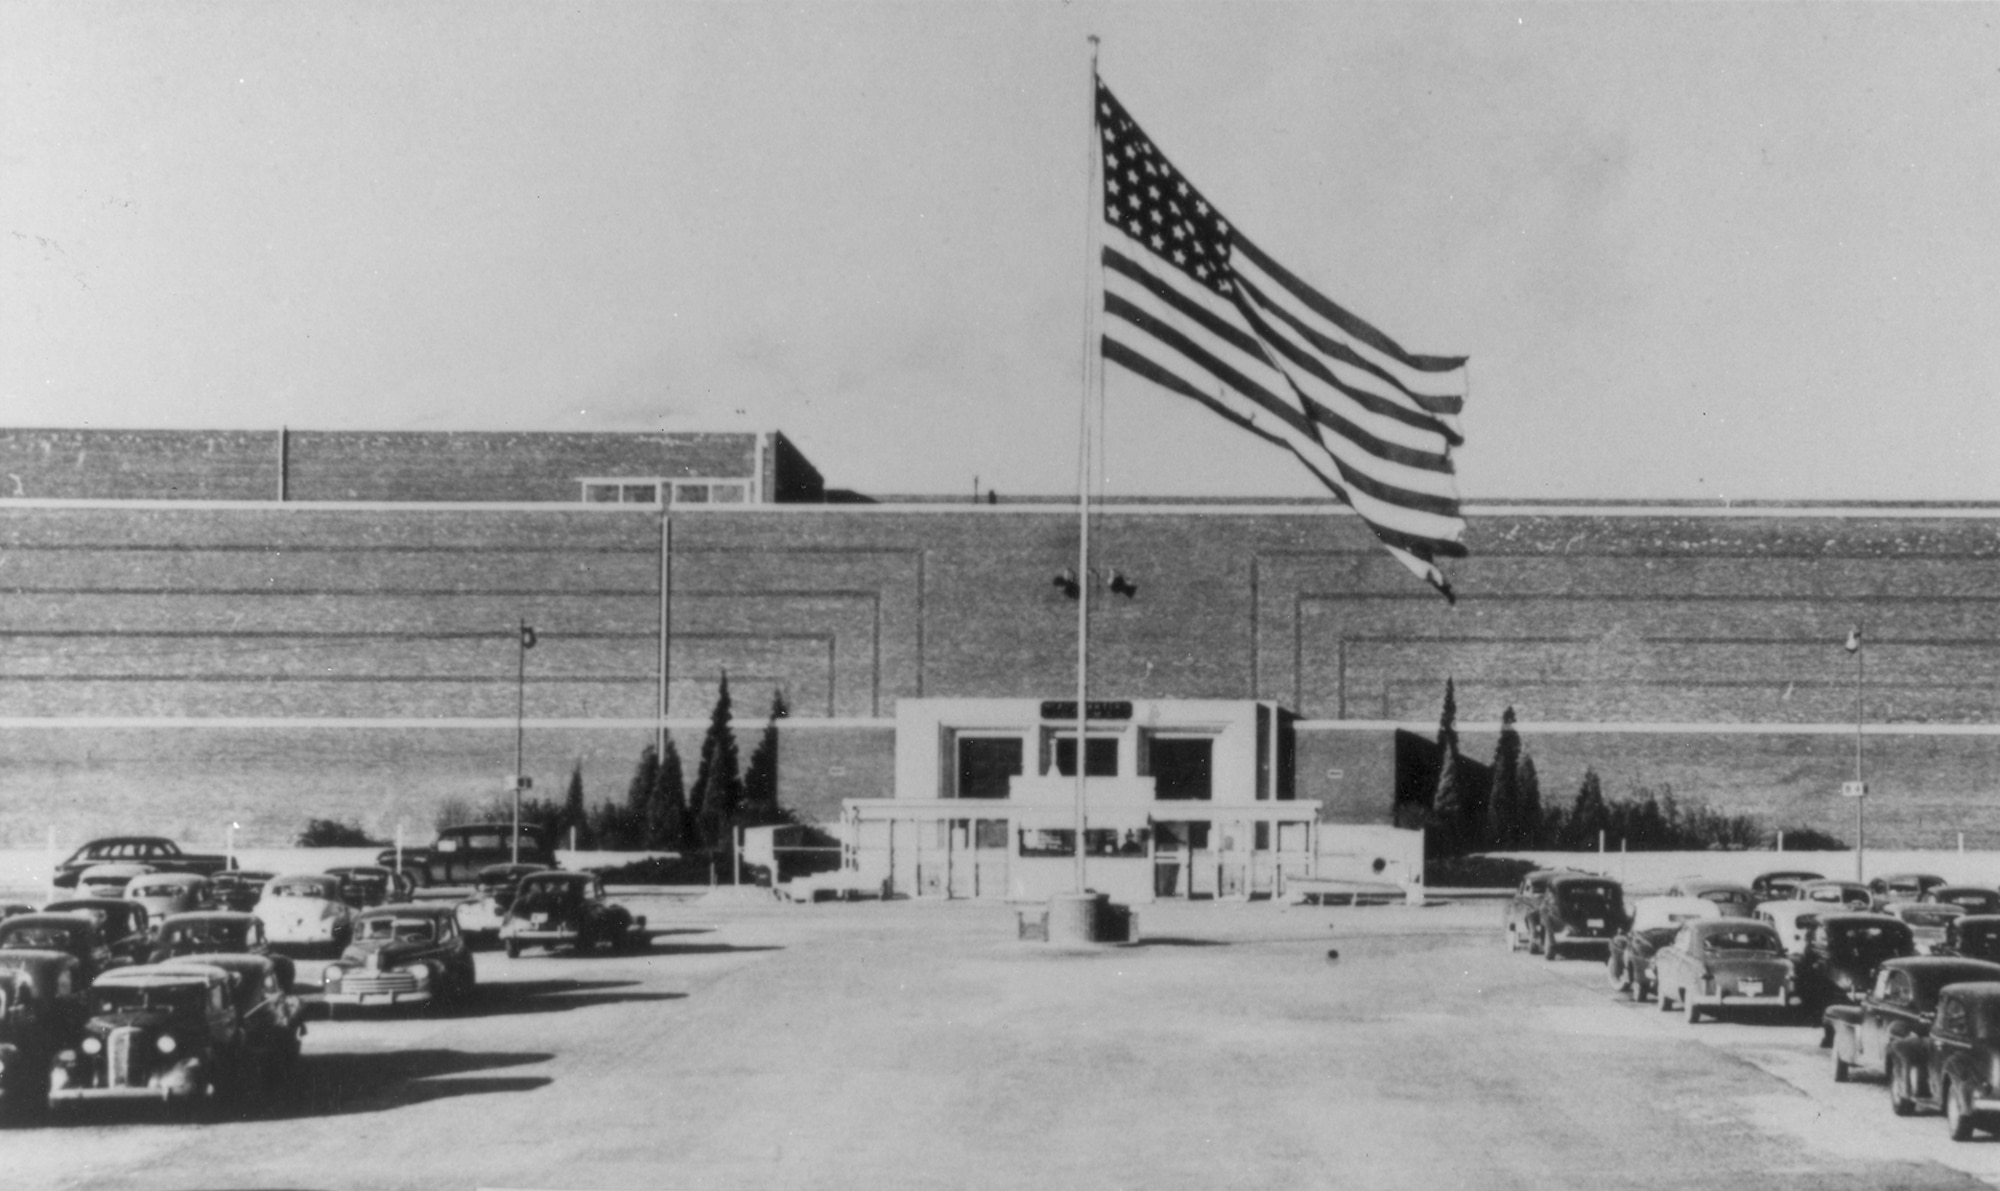 Bldg. 3001, the Oklahoma City Air Materiel Area headquarters, in the late 1940s.